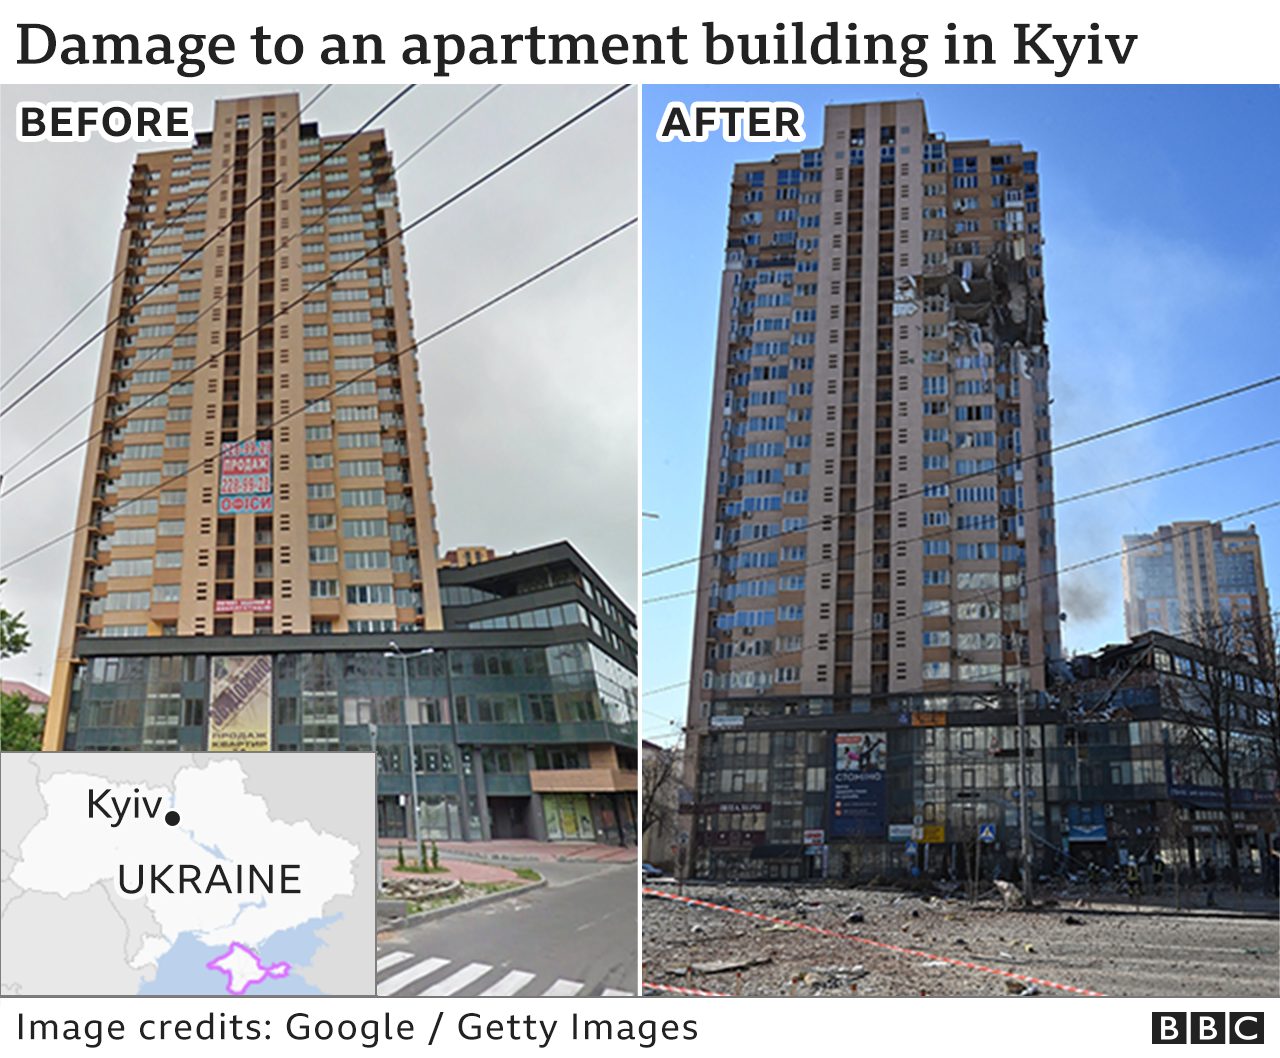 Images showing before and after an attack on Kyiv in Ukraine